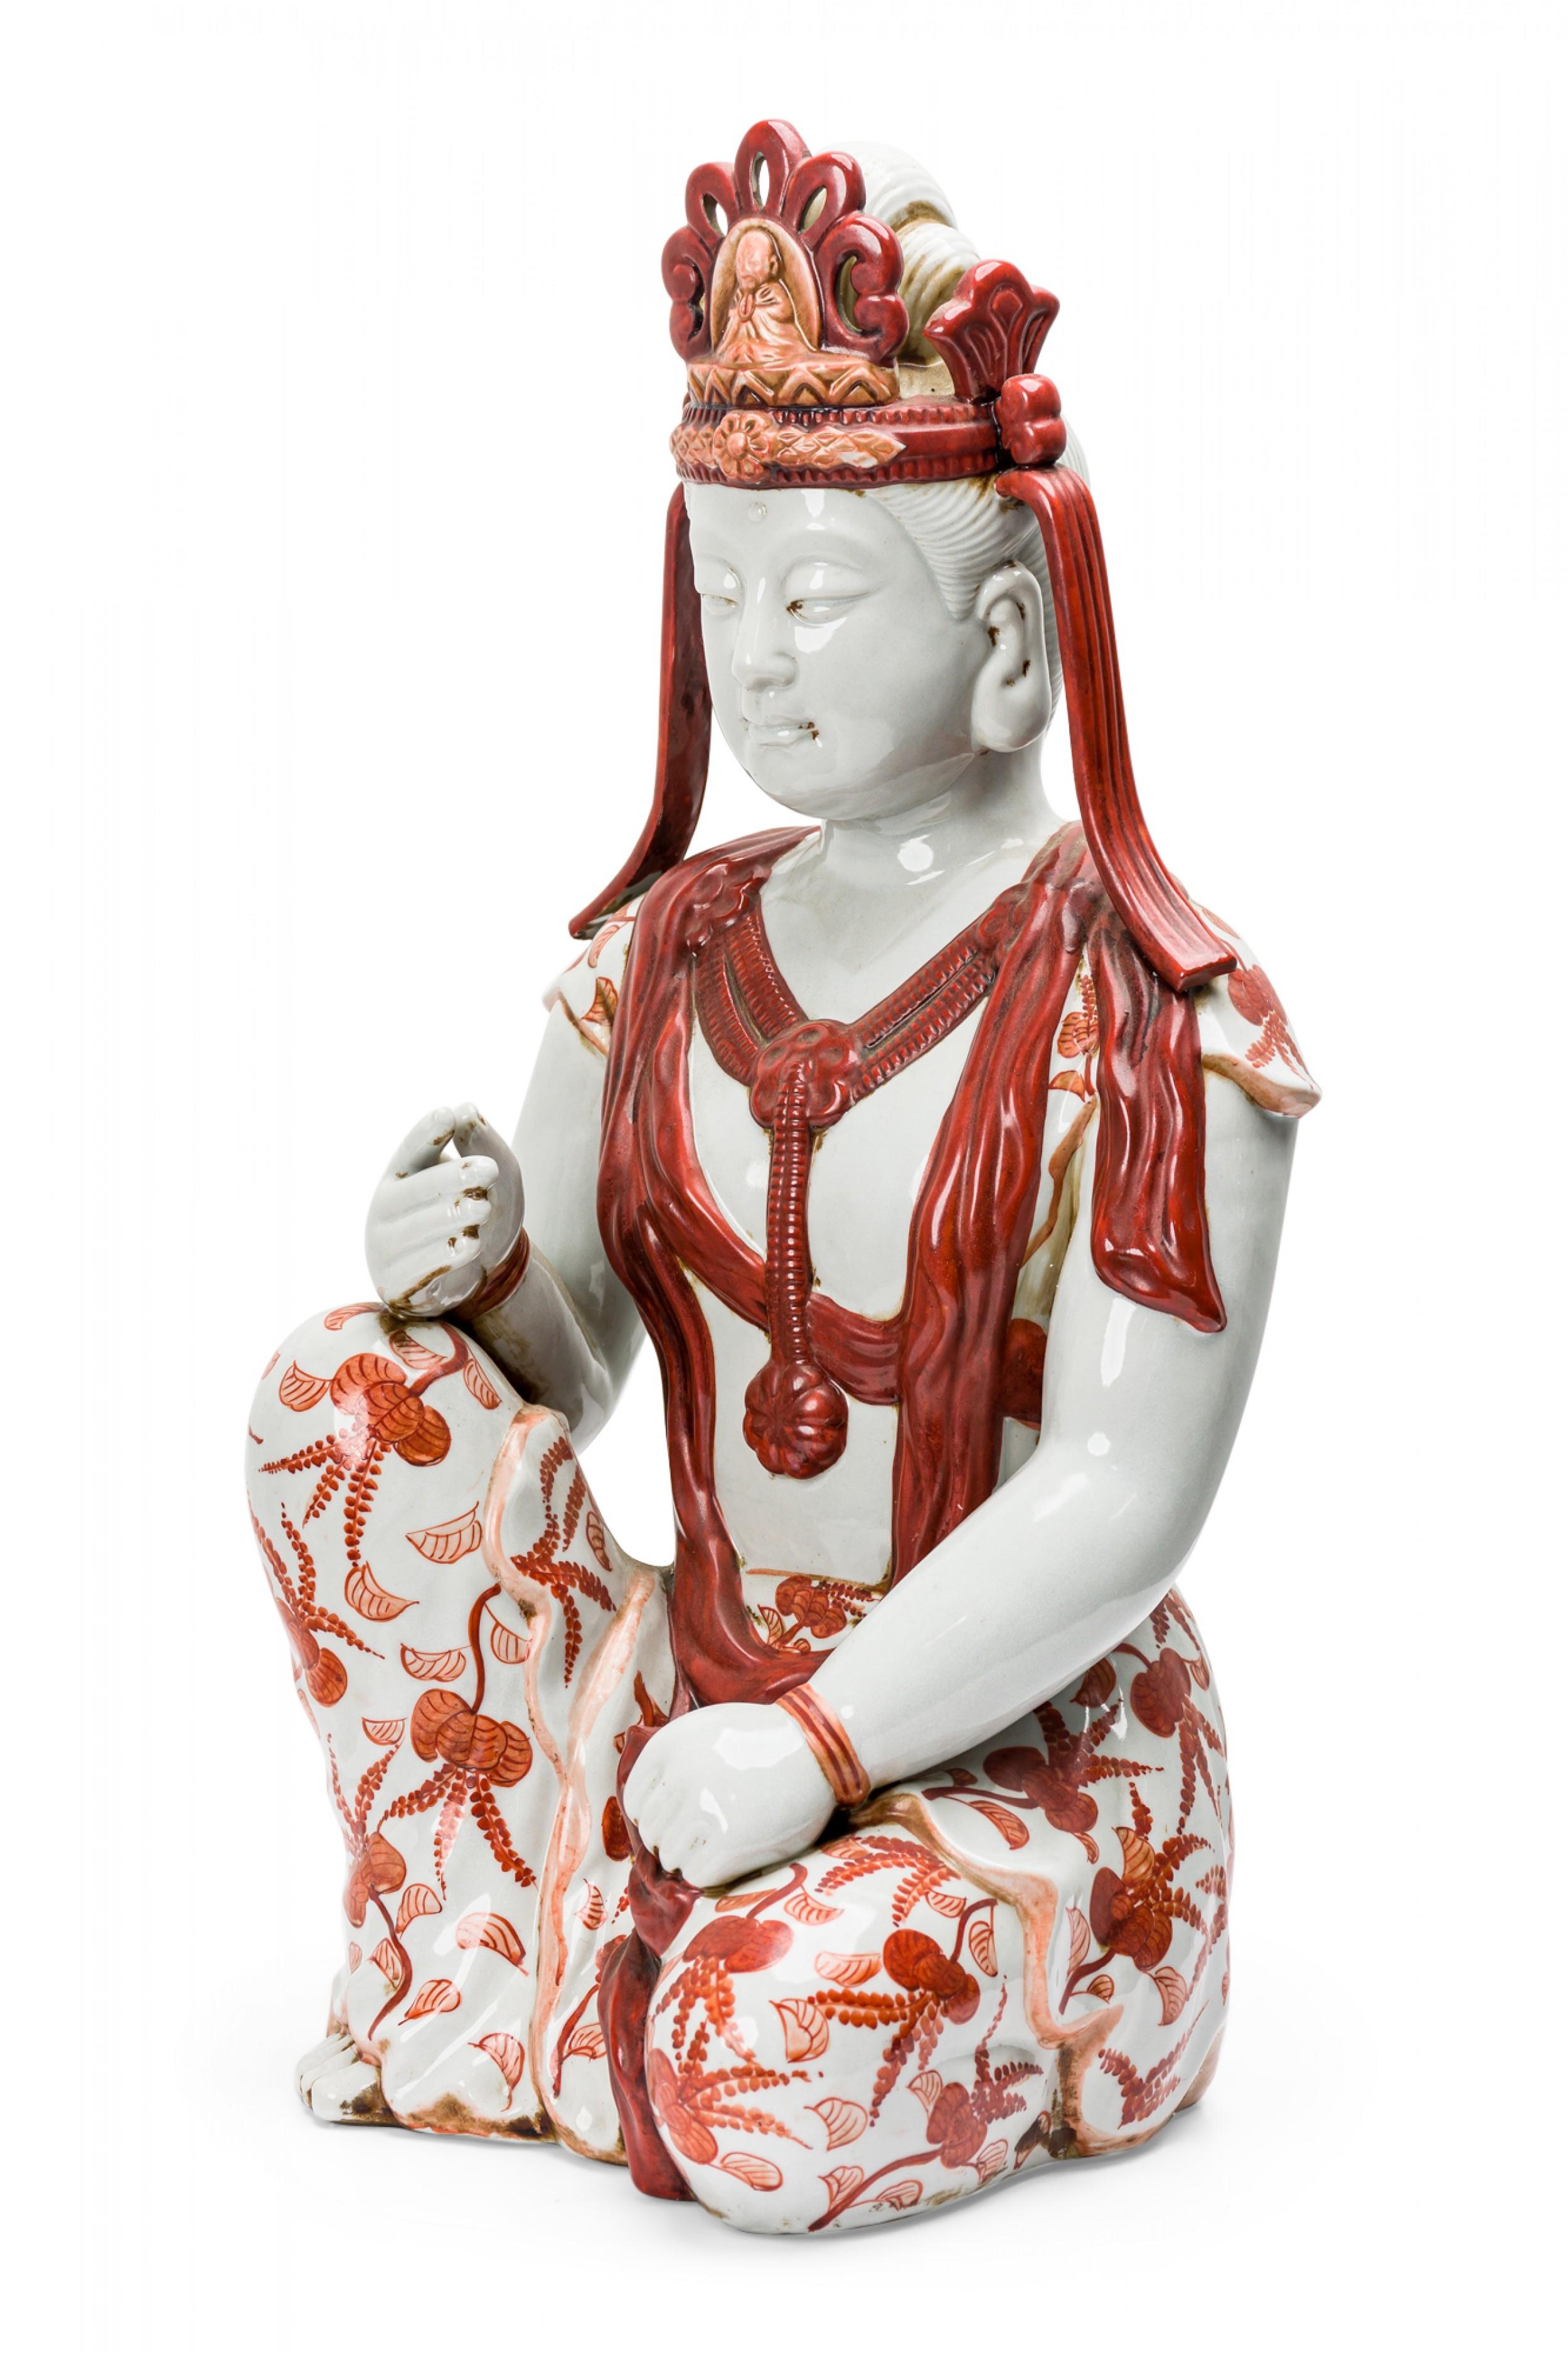 Vintage Tibetan porcelain statue depicting a seated Buddha, with hand painted orange detail.